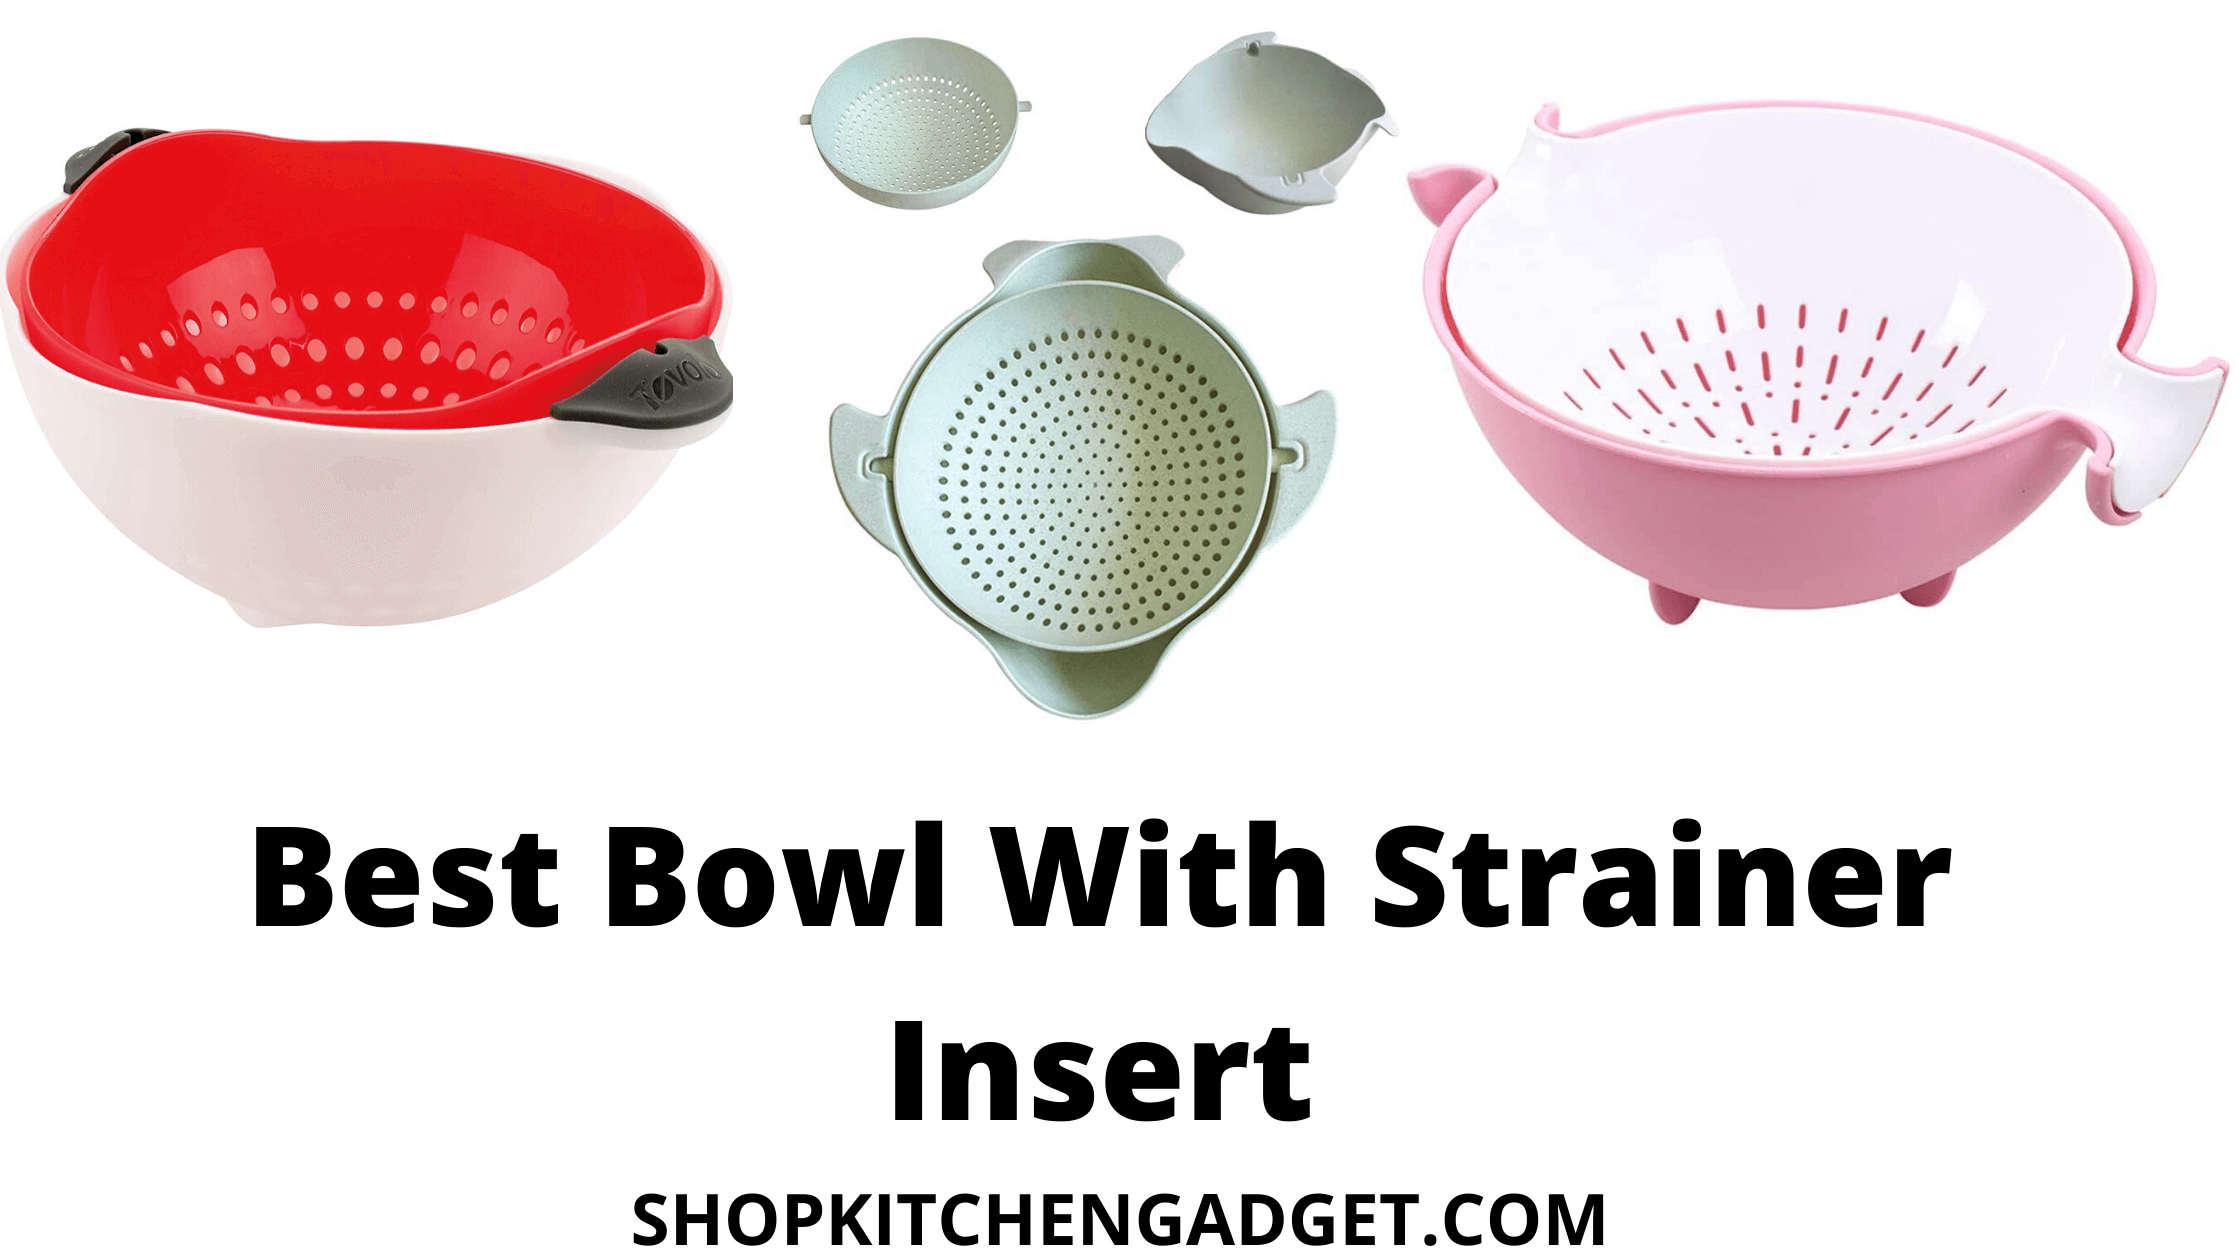 Best Bowl With Strainer Insert